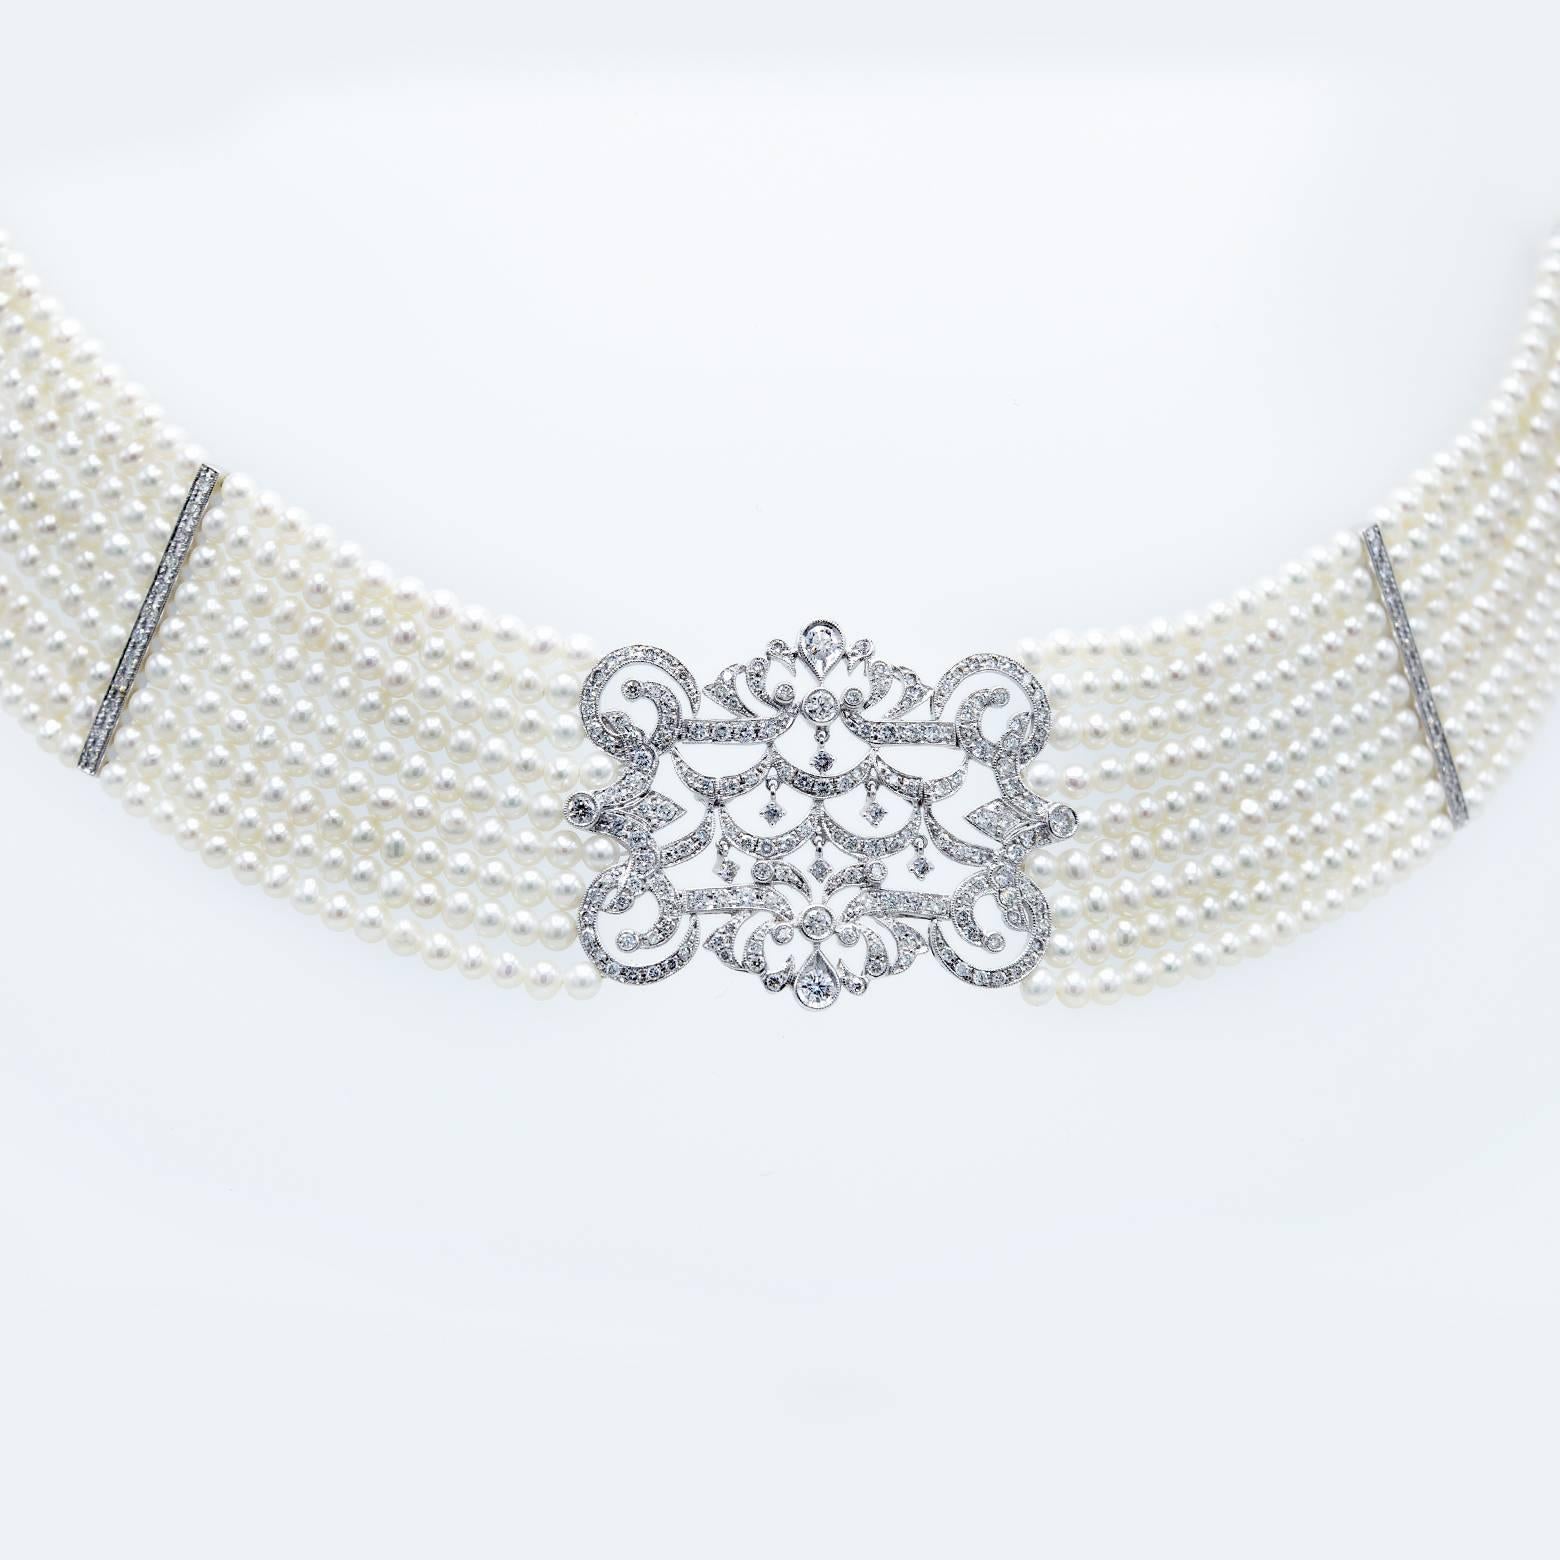 Absolutely Stunning! Diamonds and Pearls, extravagant, multi-layered, and gorgeous! The pearls are delicate and in the bountiful while the diamond center piece sparkles from across the room! I don't know if there is a piece more fair! This season of